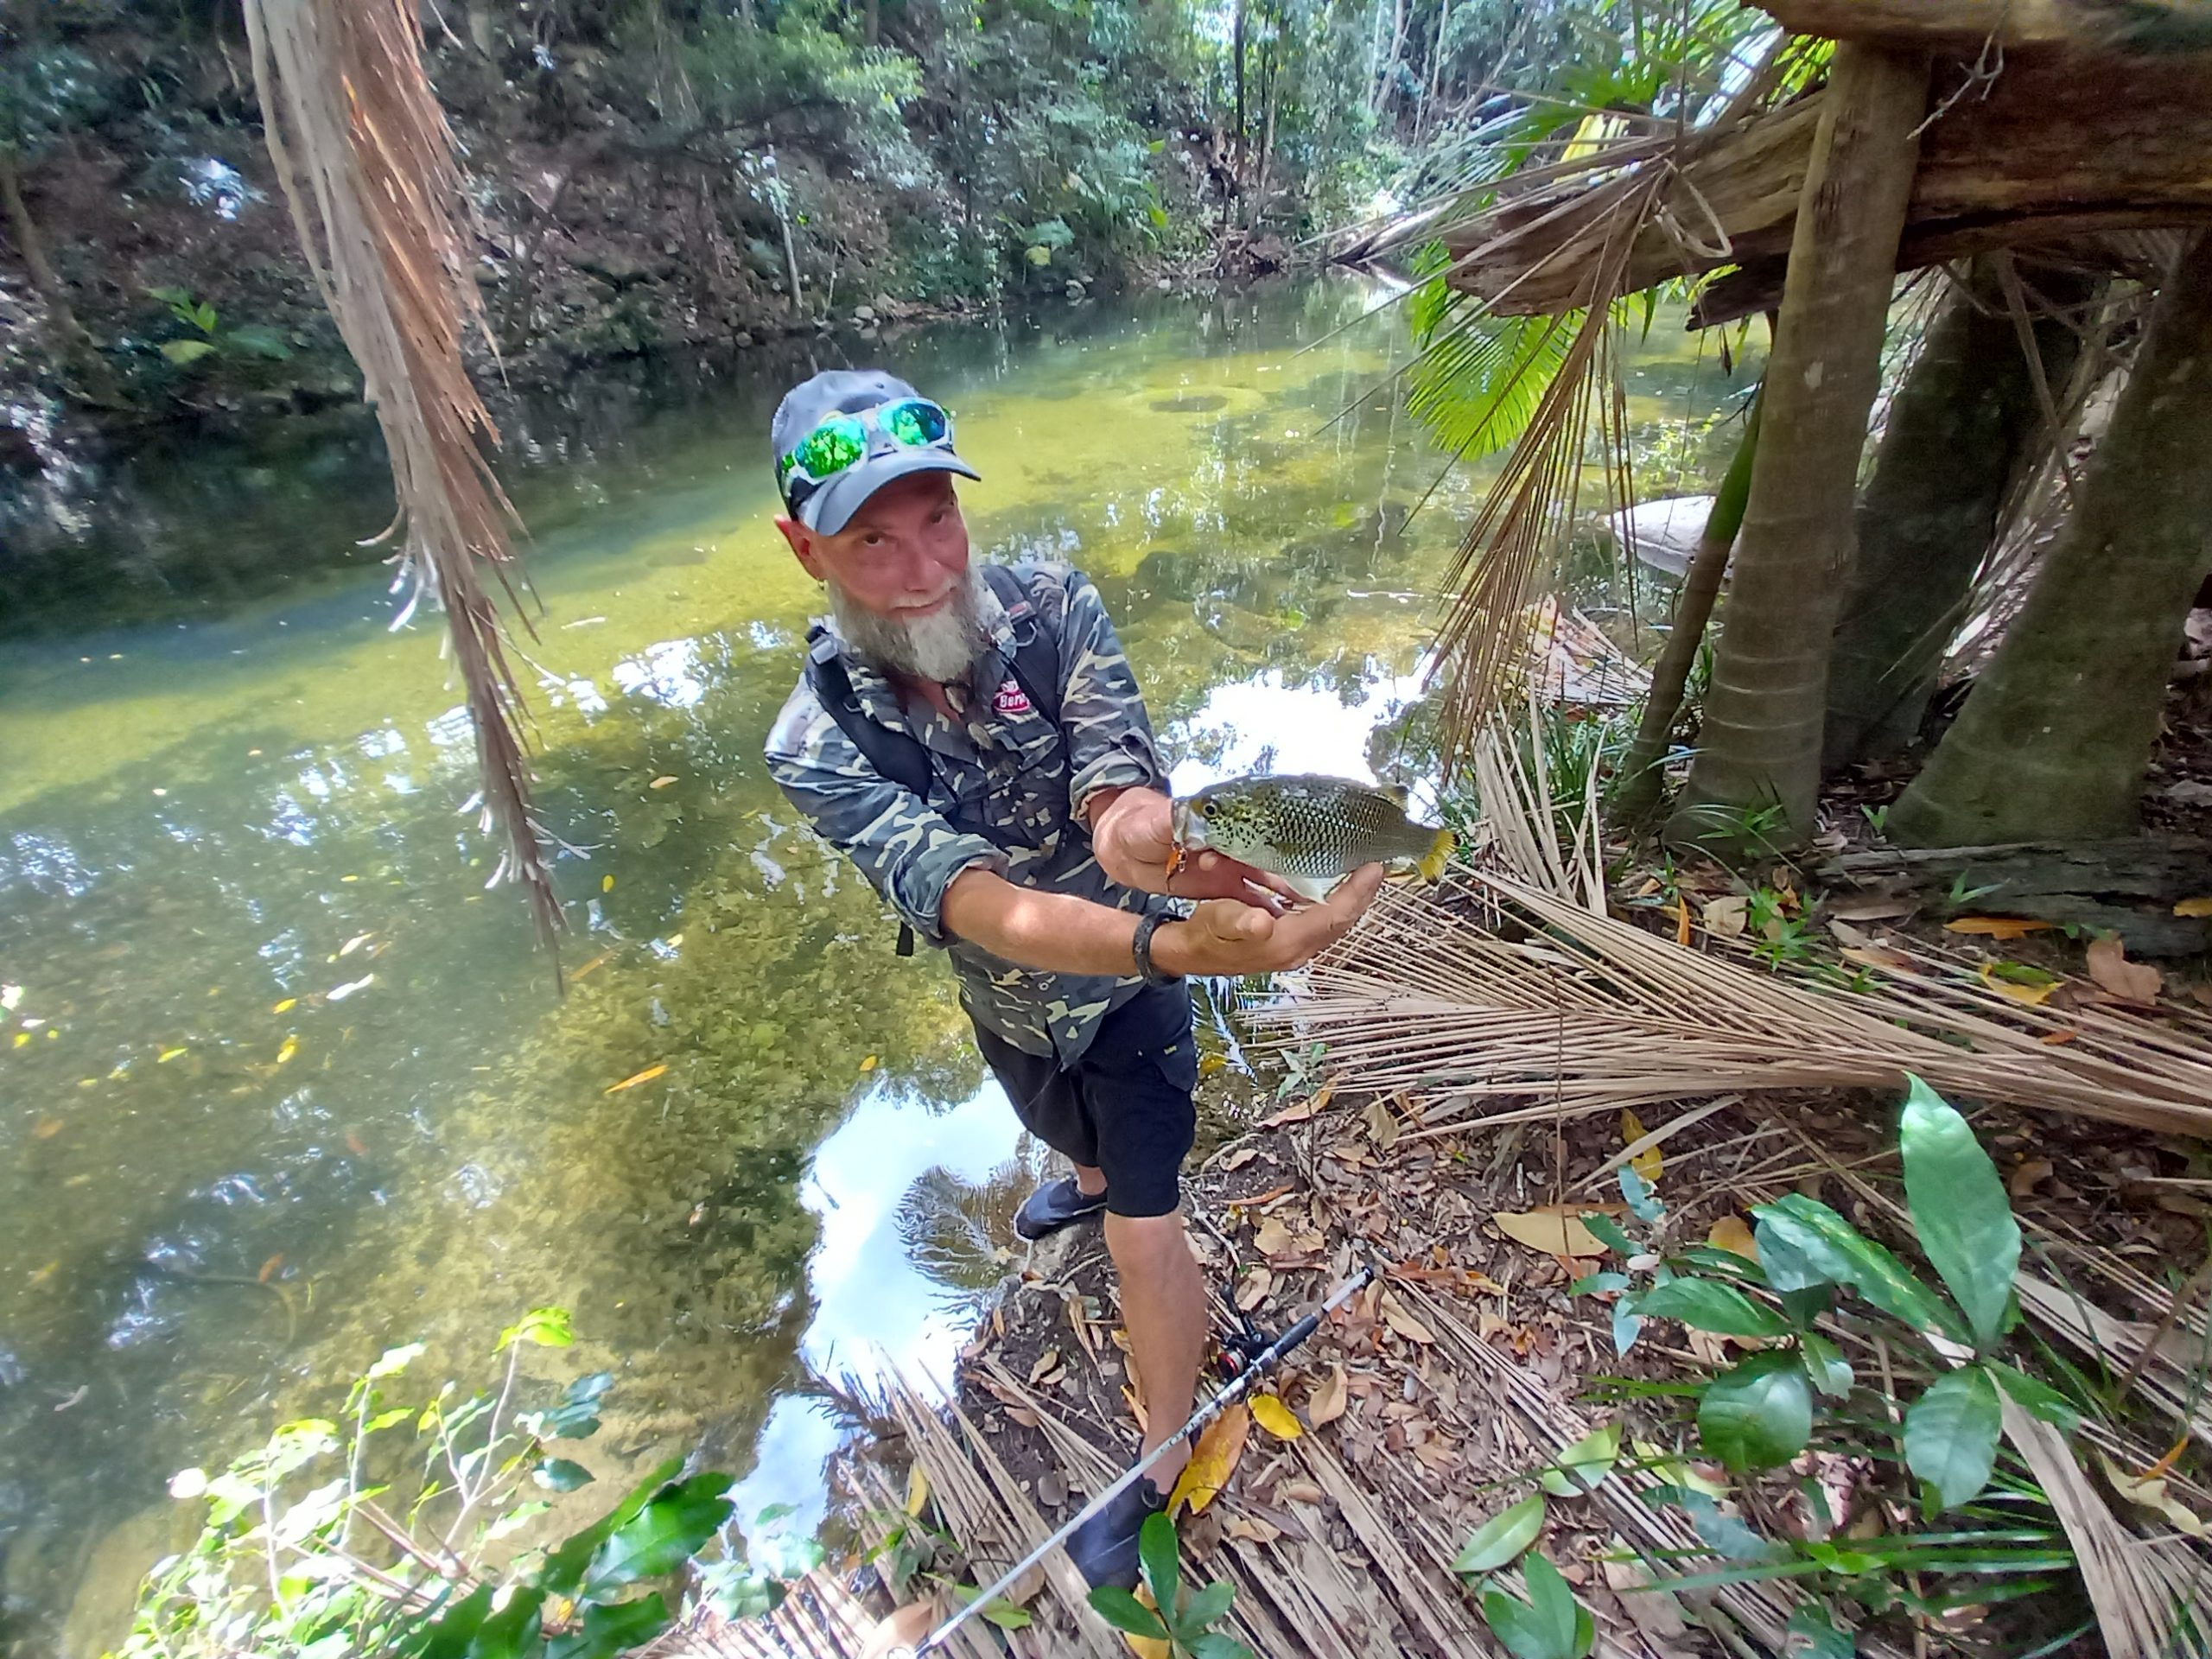 Fishing in tropical rainforests is an adventure like no other. Catch some big fish on this unique fishing trip!